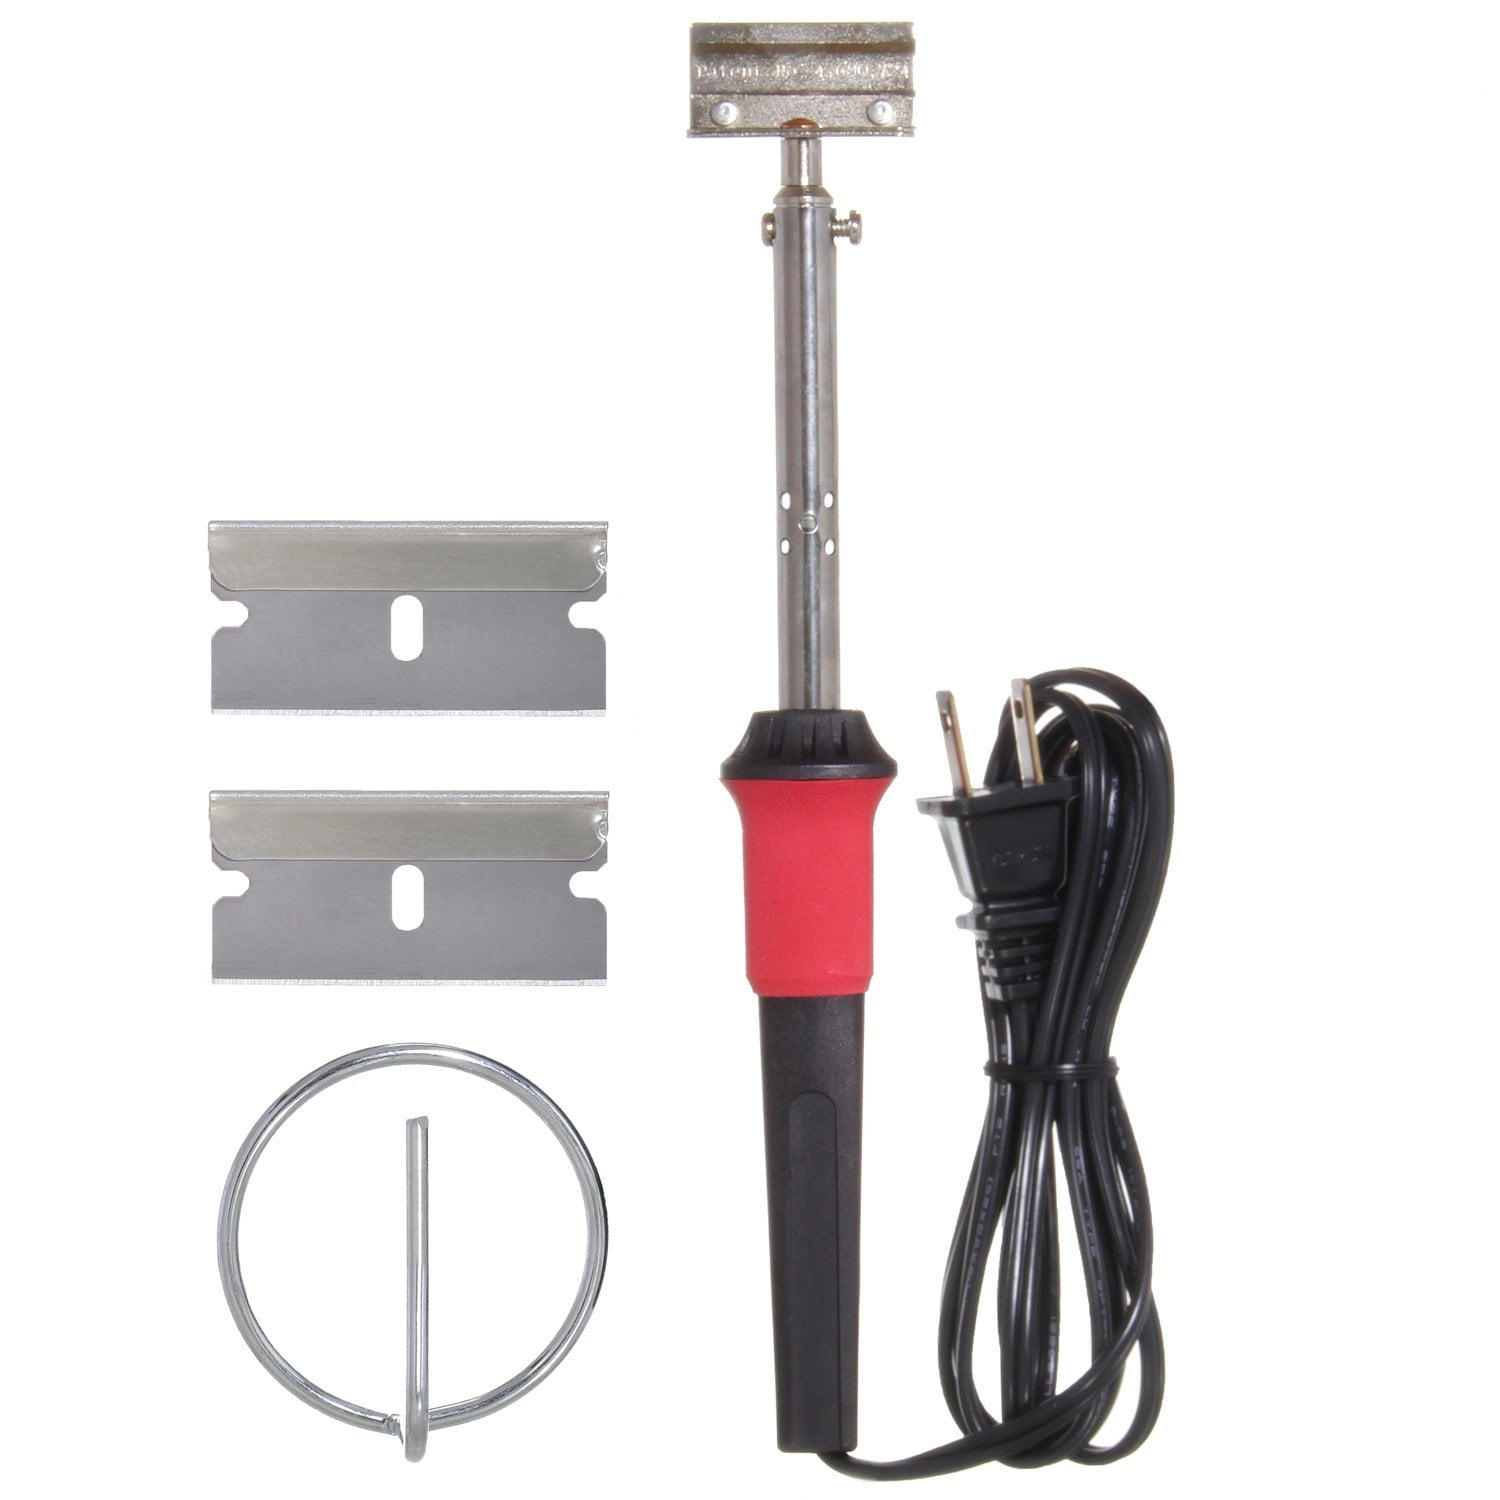 AUTO BODY SHOP Electric Sticker Striping HEAT HOT Razor Blade DECAL REMOVAL Tool